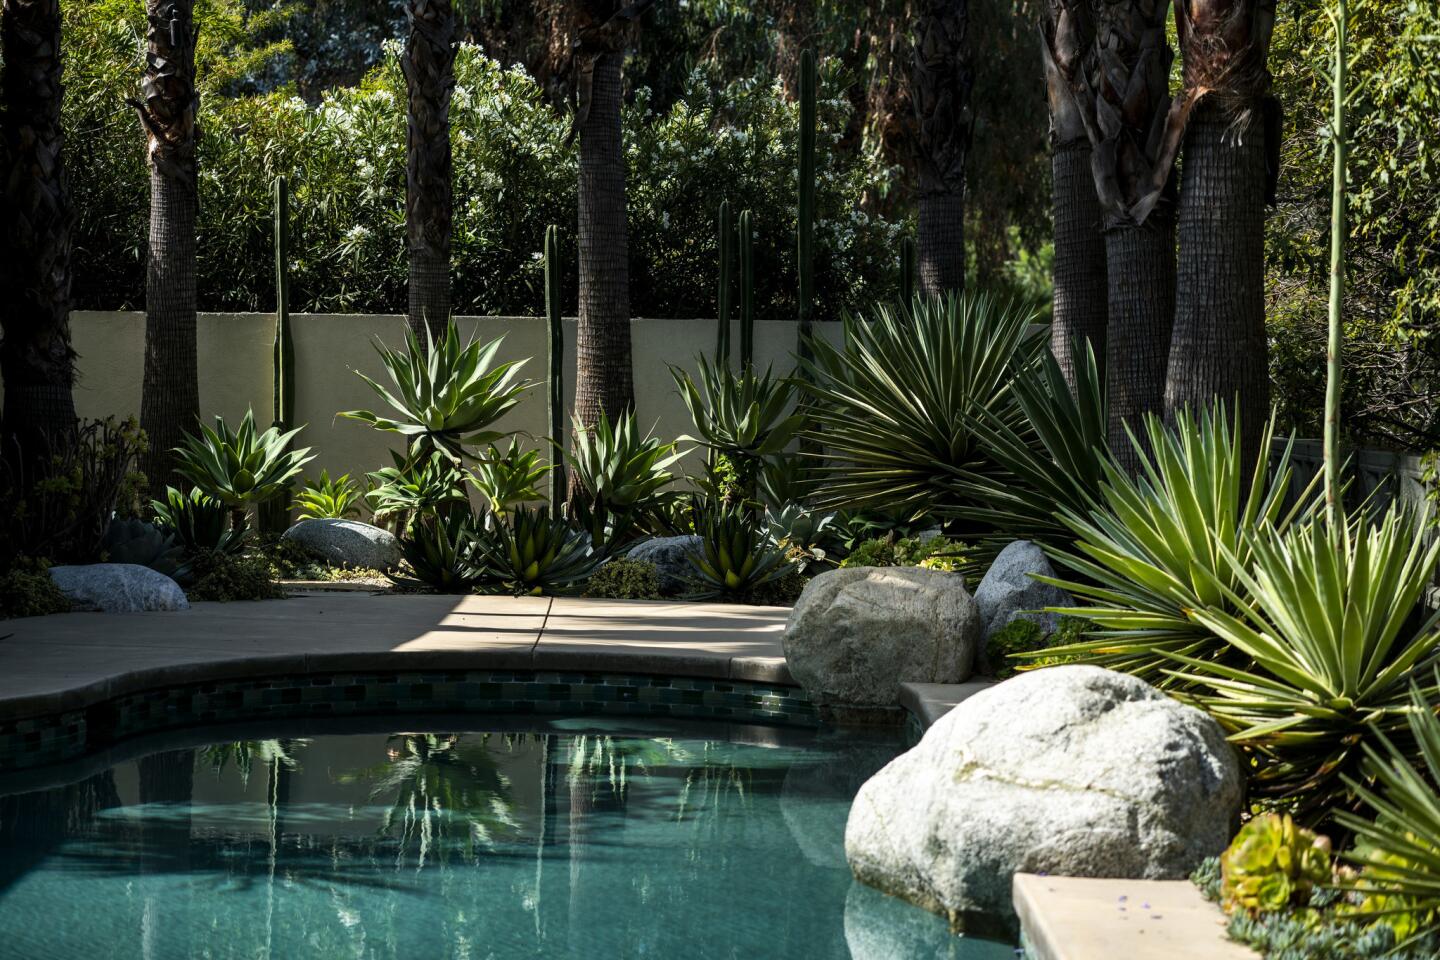 A new drought-friendly garden for their new Mid-century Modern home